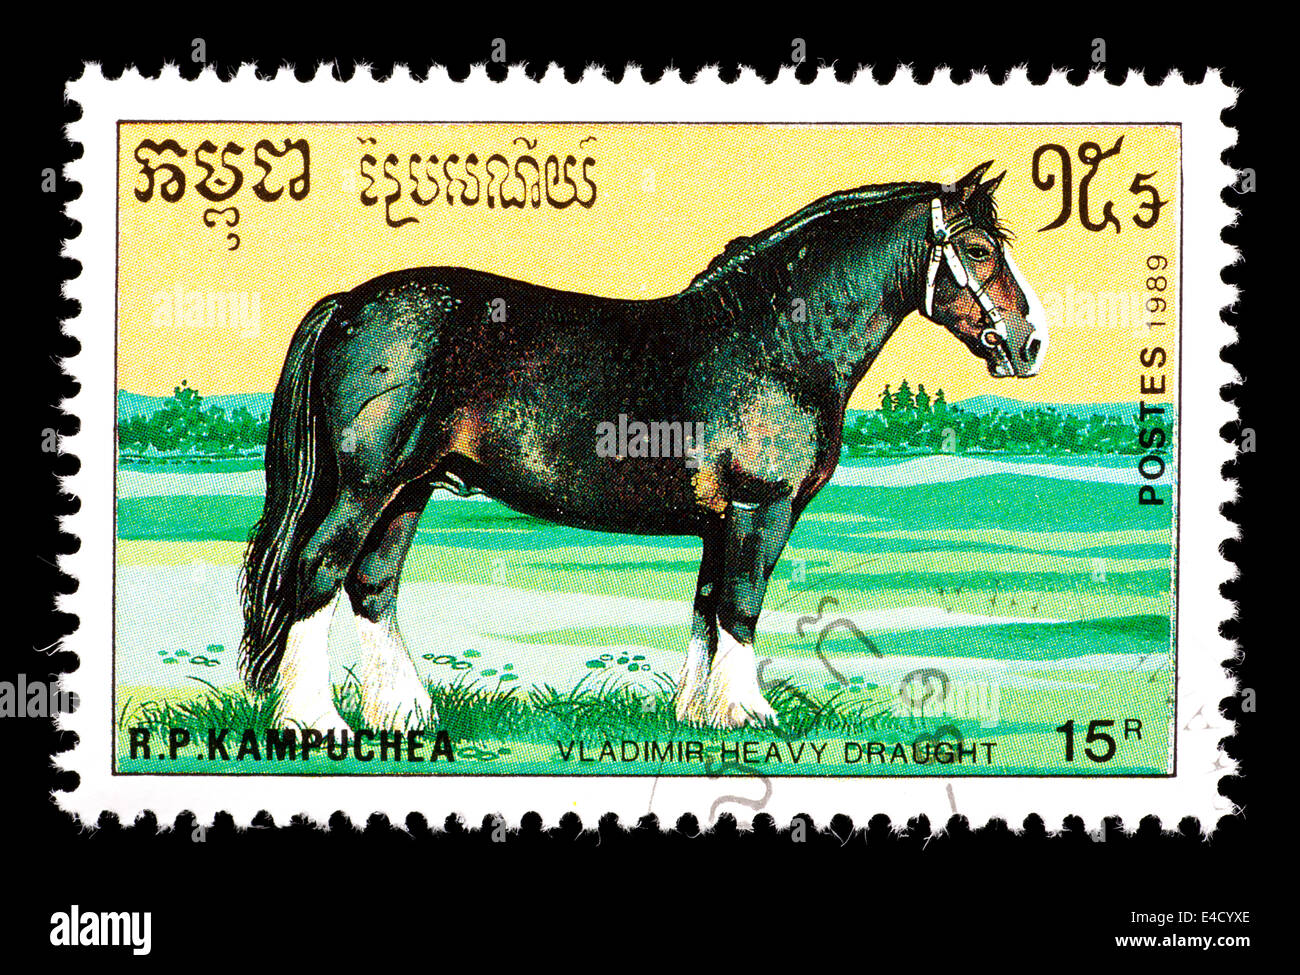 Postage stamp from Cambodia (Kampuchea) depicting a Vladimir heavy draft horse. Stock Photo